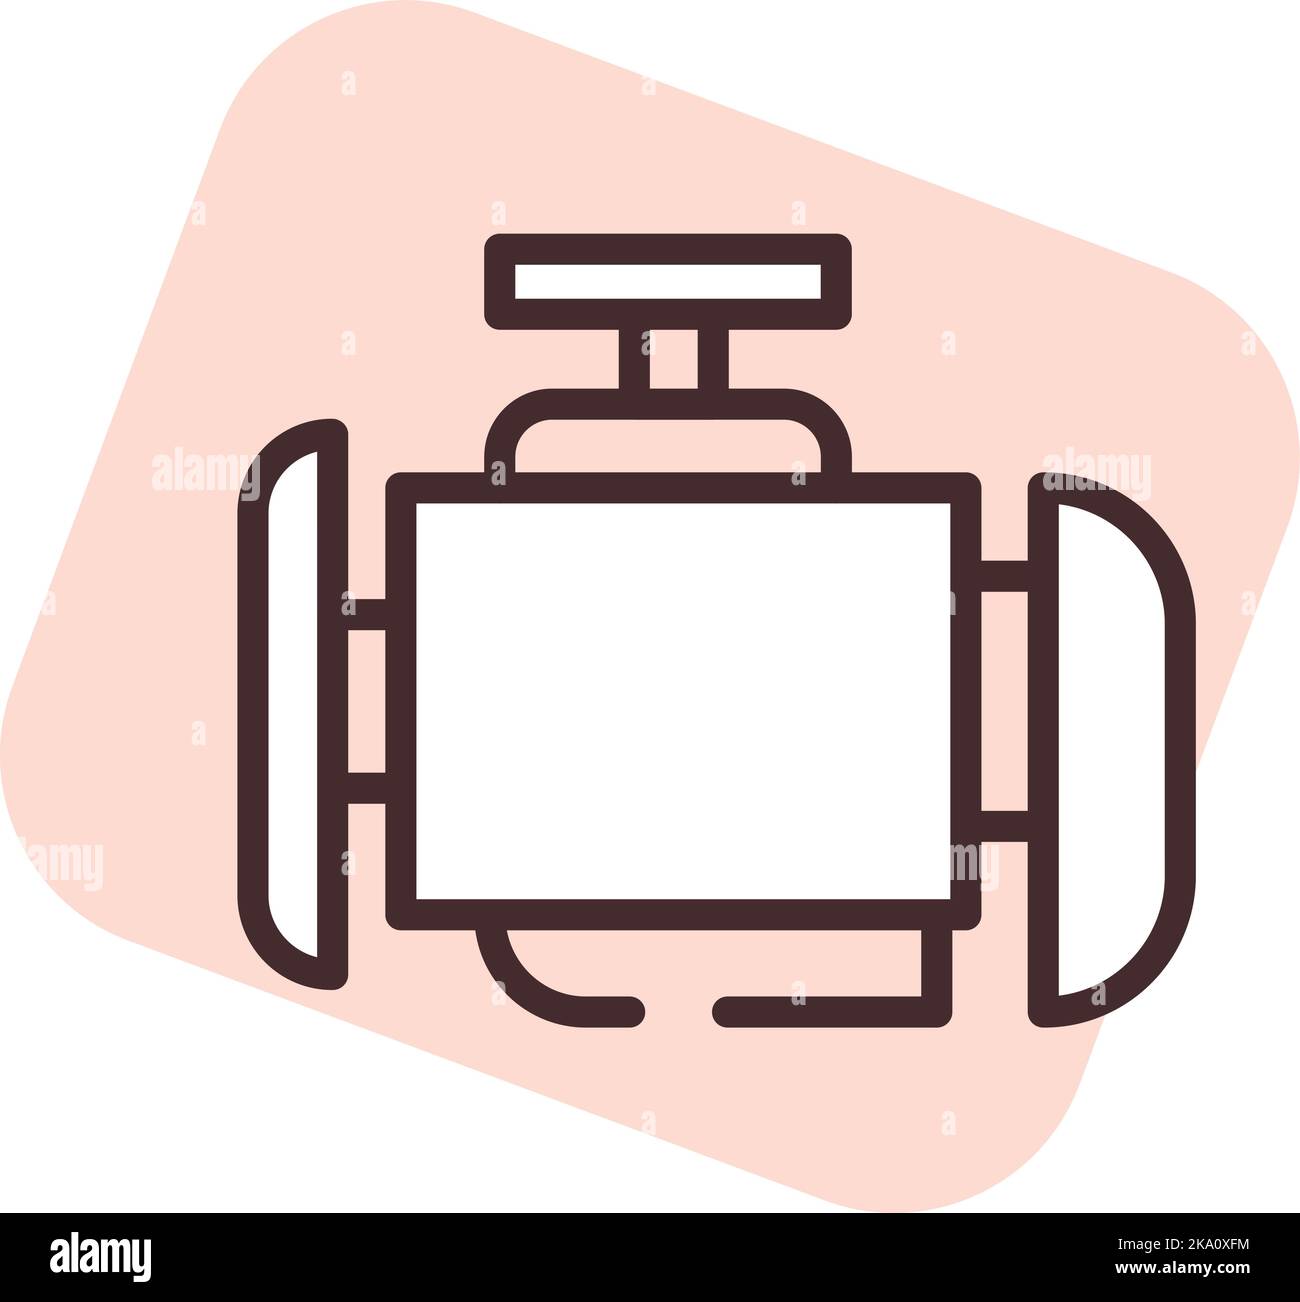 Car engine, illustration or icon, vector on white background. Stock Vector